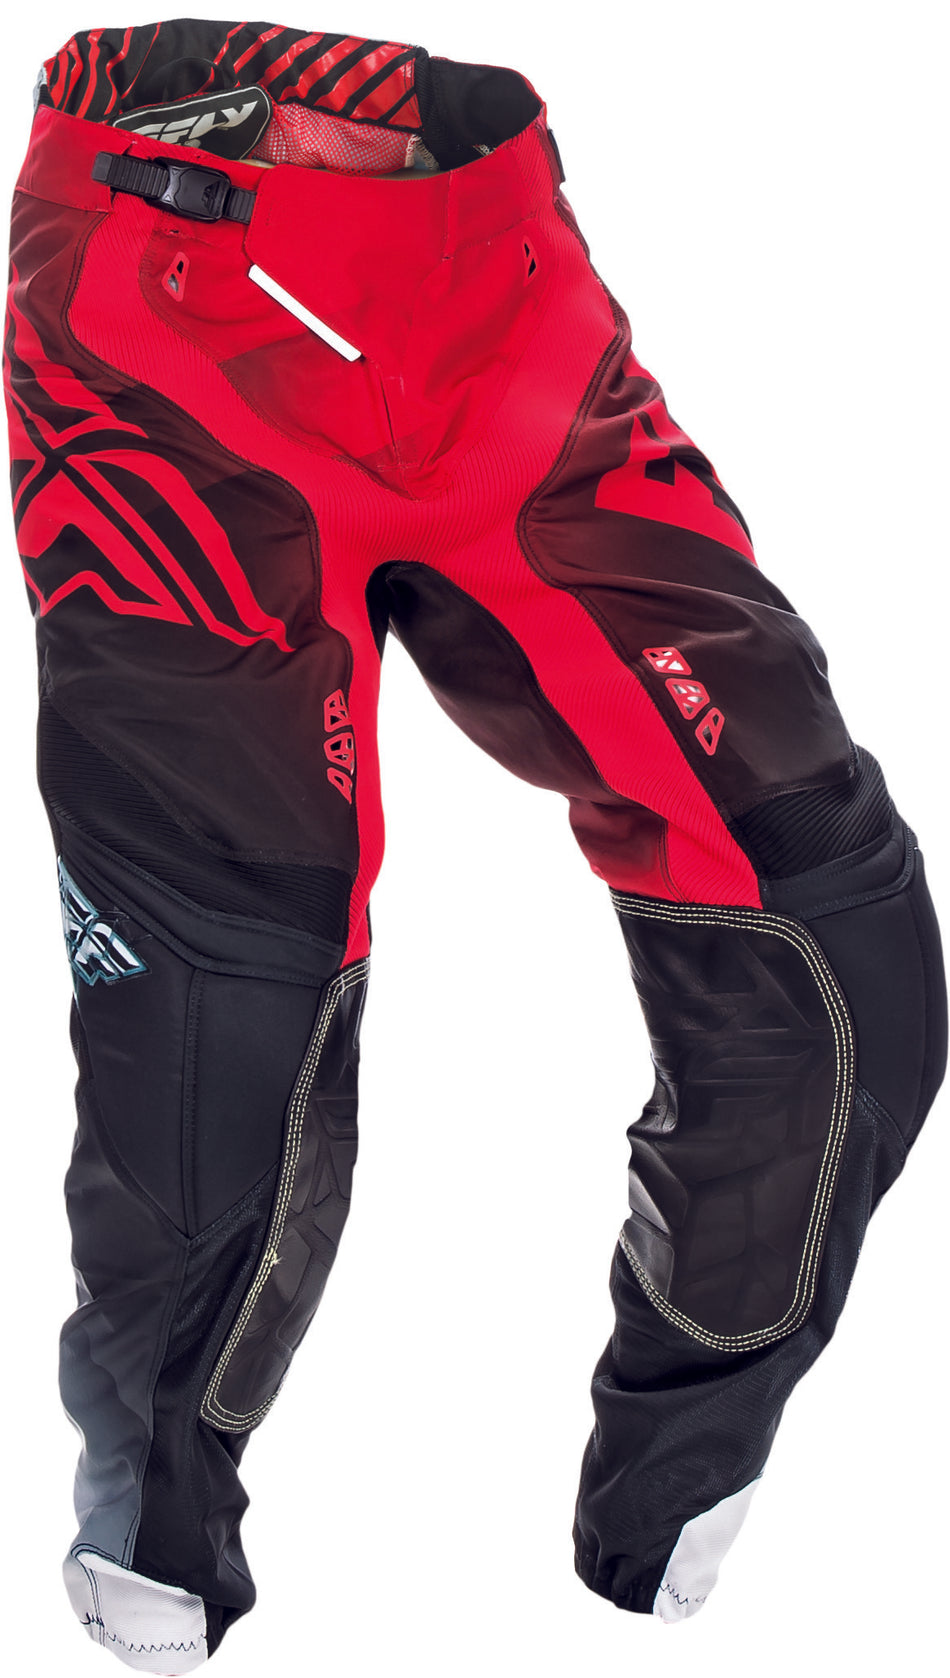 FLY RACING Lite Hydrogen Pant Red/Black/White Sz 32 370-73232